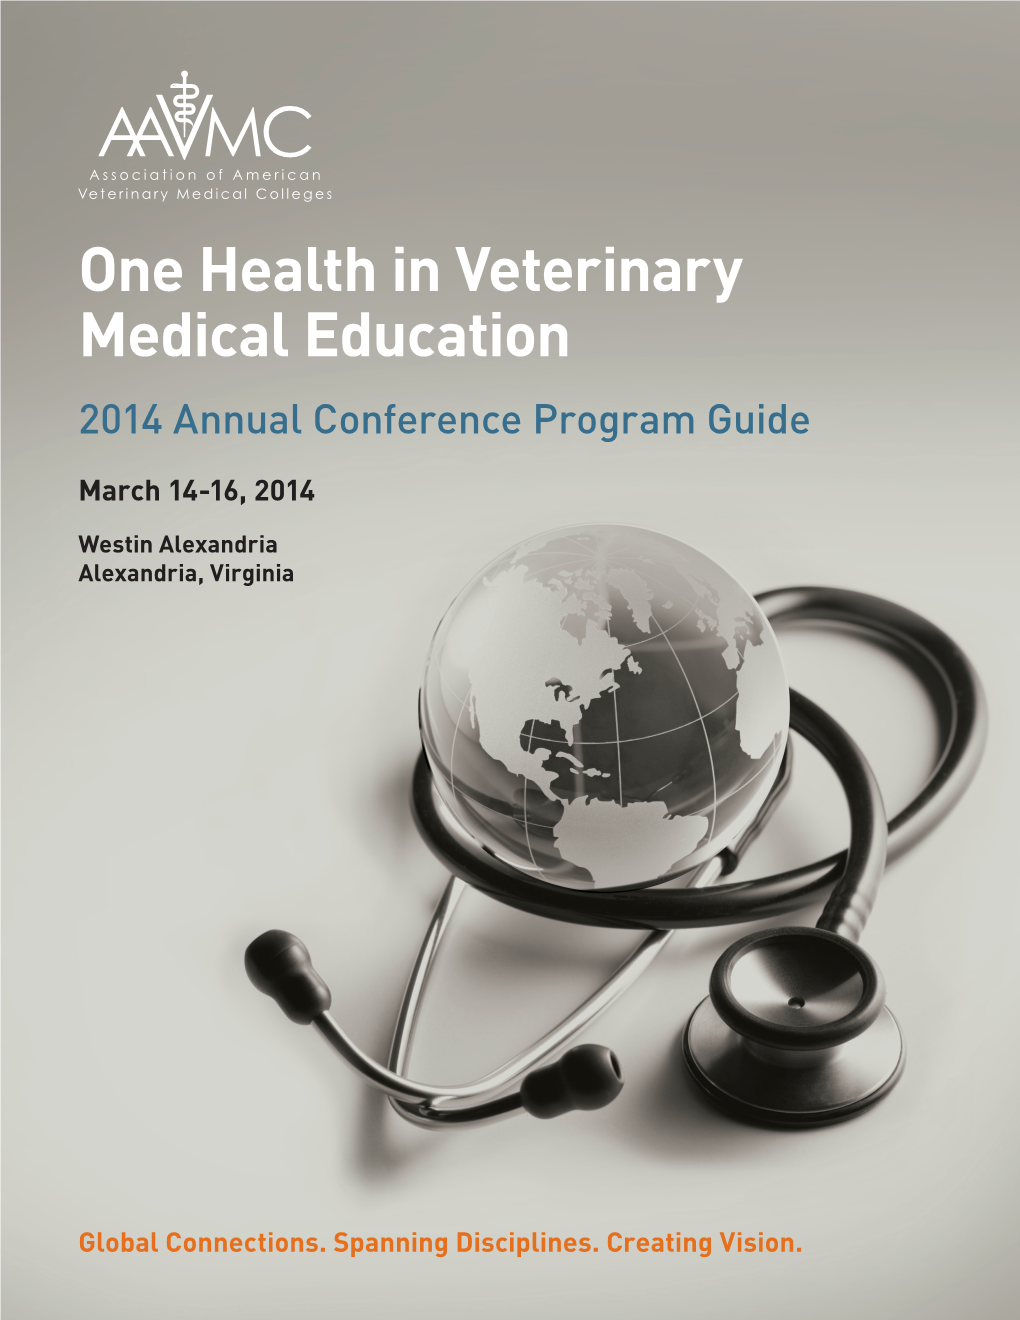 One Health in Veterinary Medical Education 2014 Annual Conference Program Guide